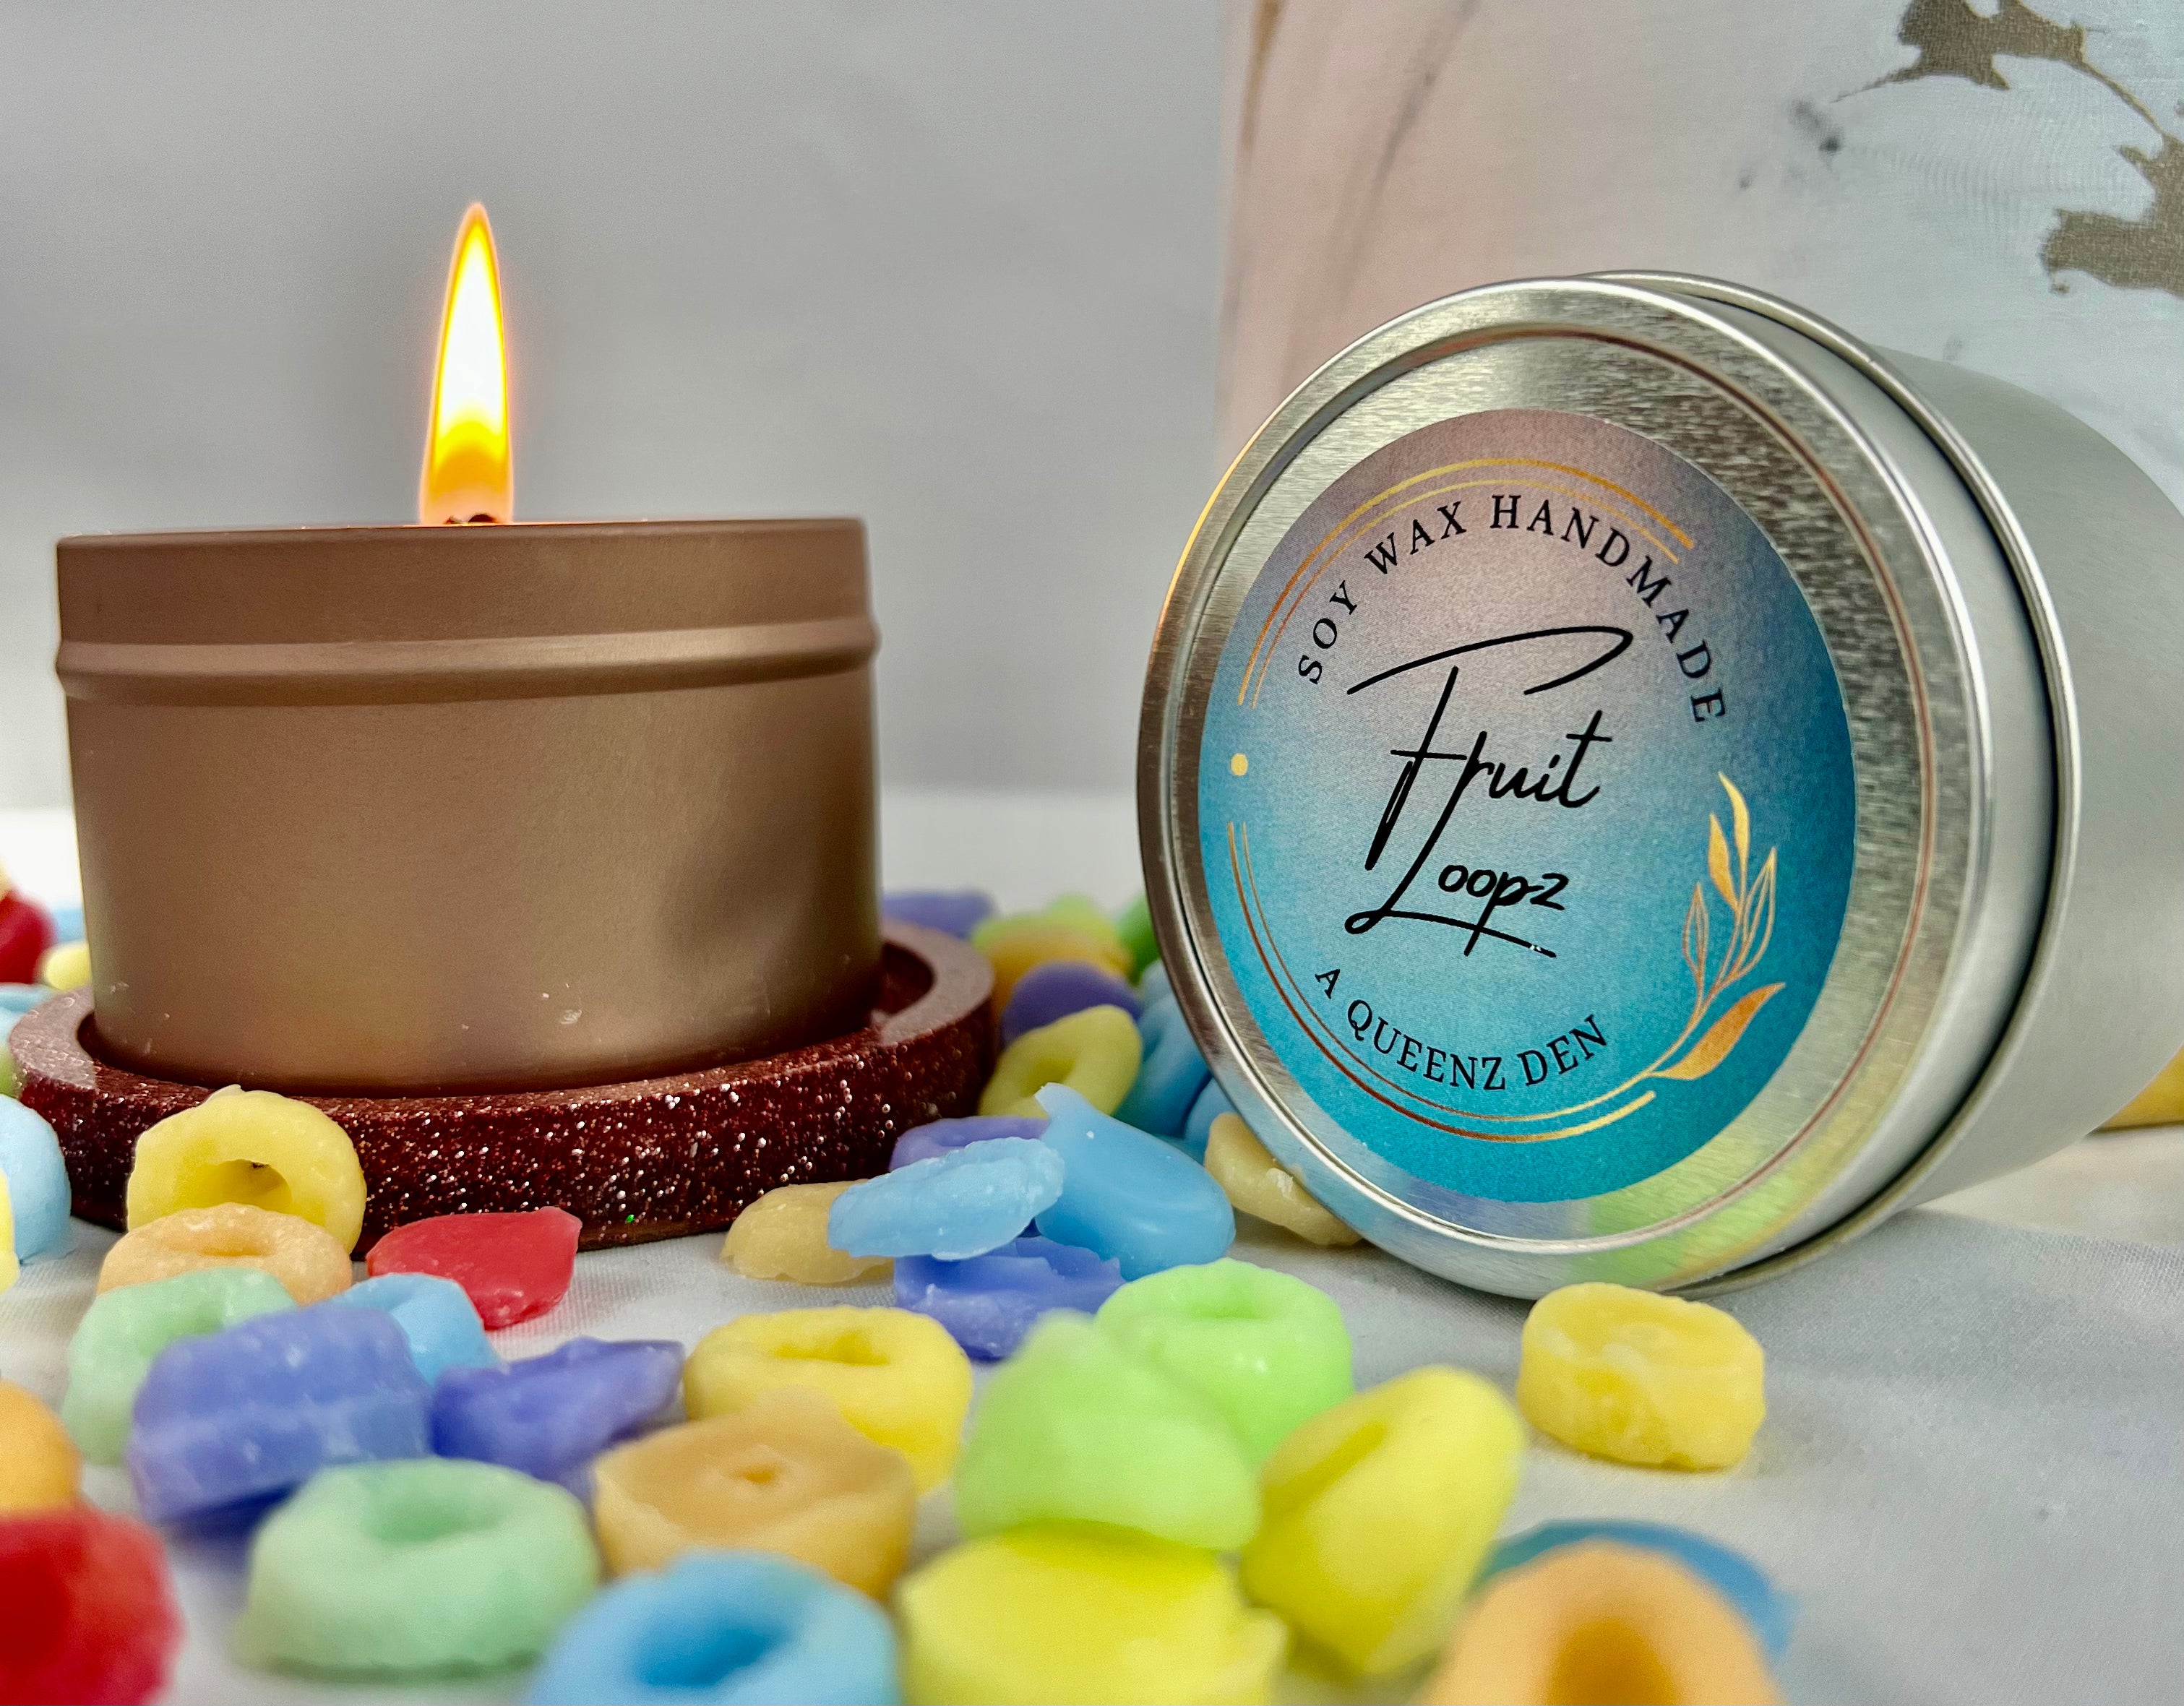 100% Soy Wax Candle- Fruit Loopz Candle- Highly Scented - AQueenzDen